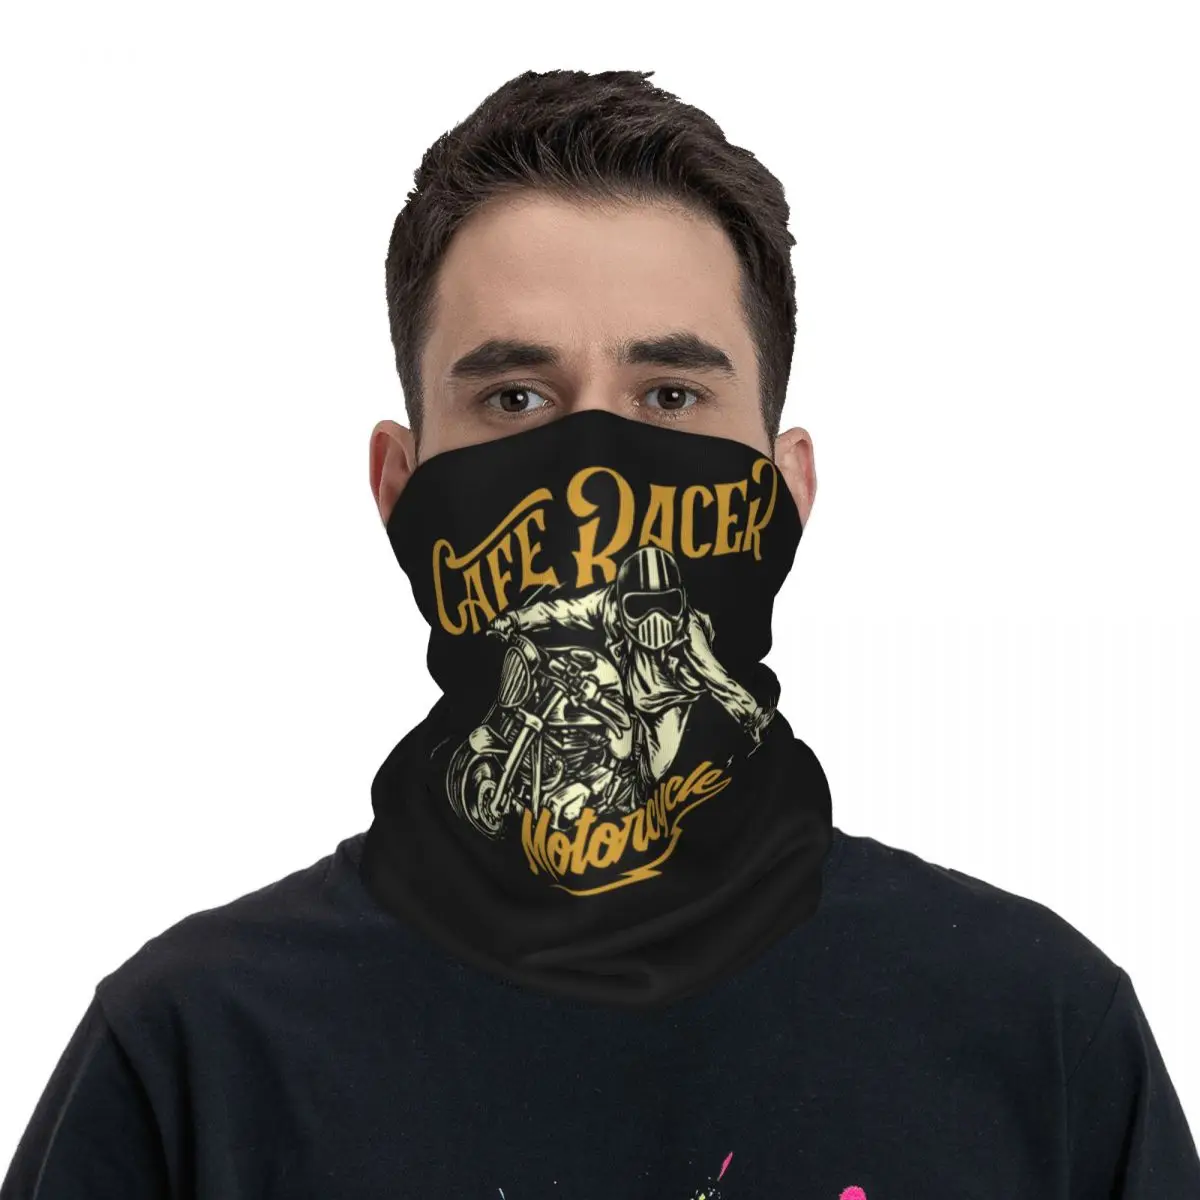 Biker Half Face Mask for Motorcycle Riding - Dust Wind Shield Cover Neck  Gaiter